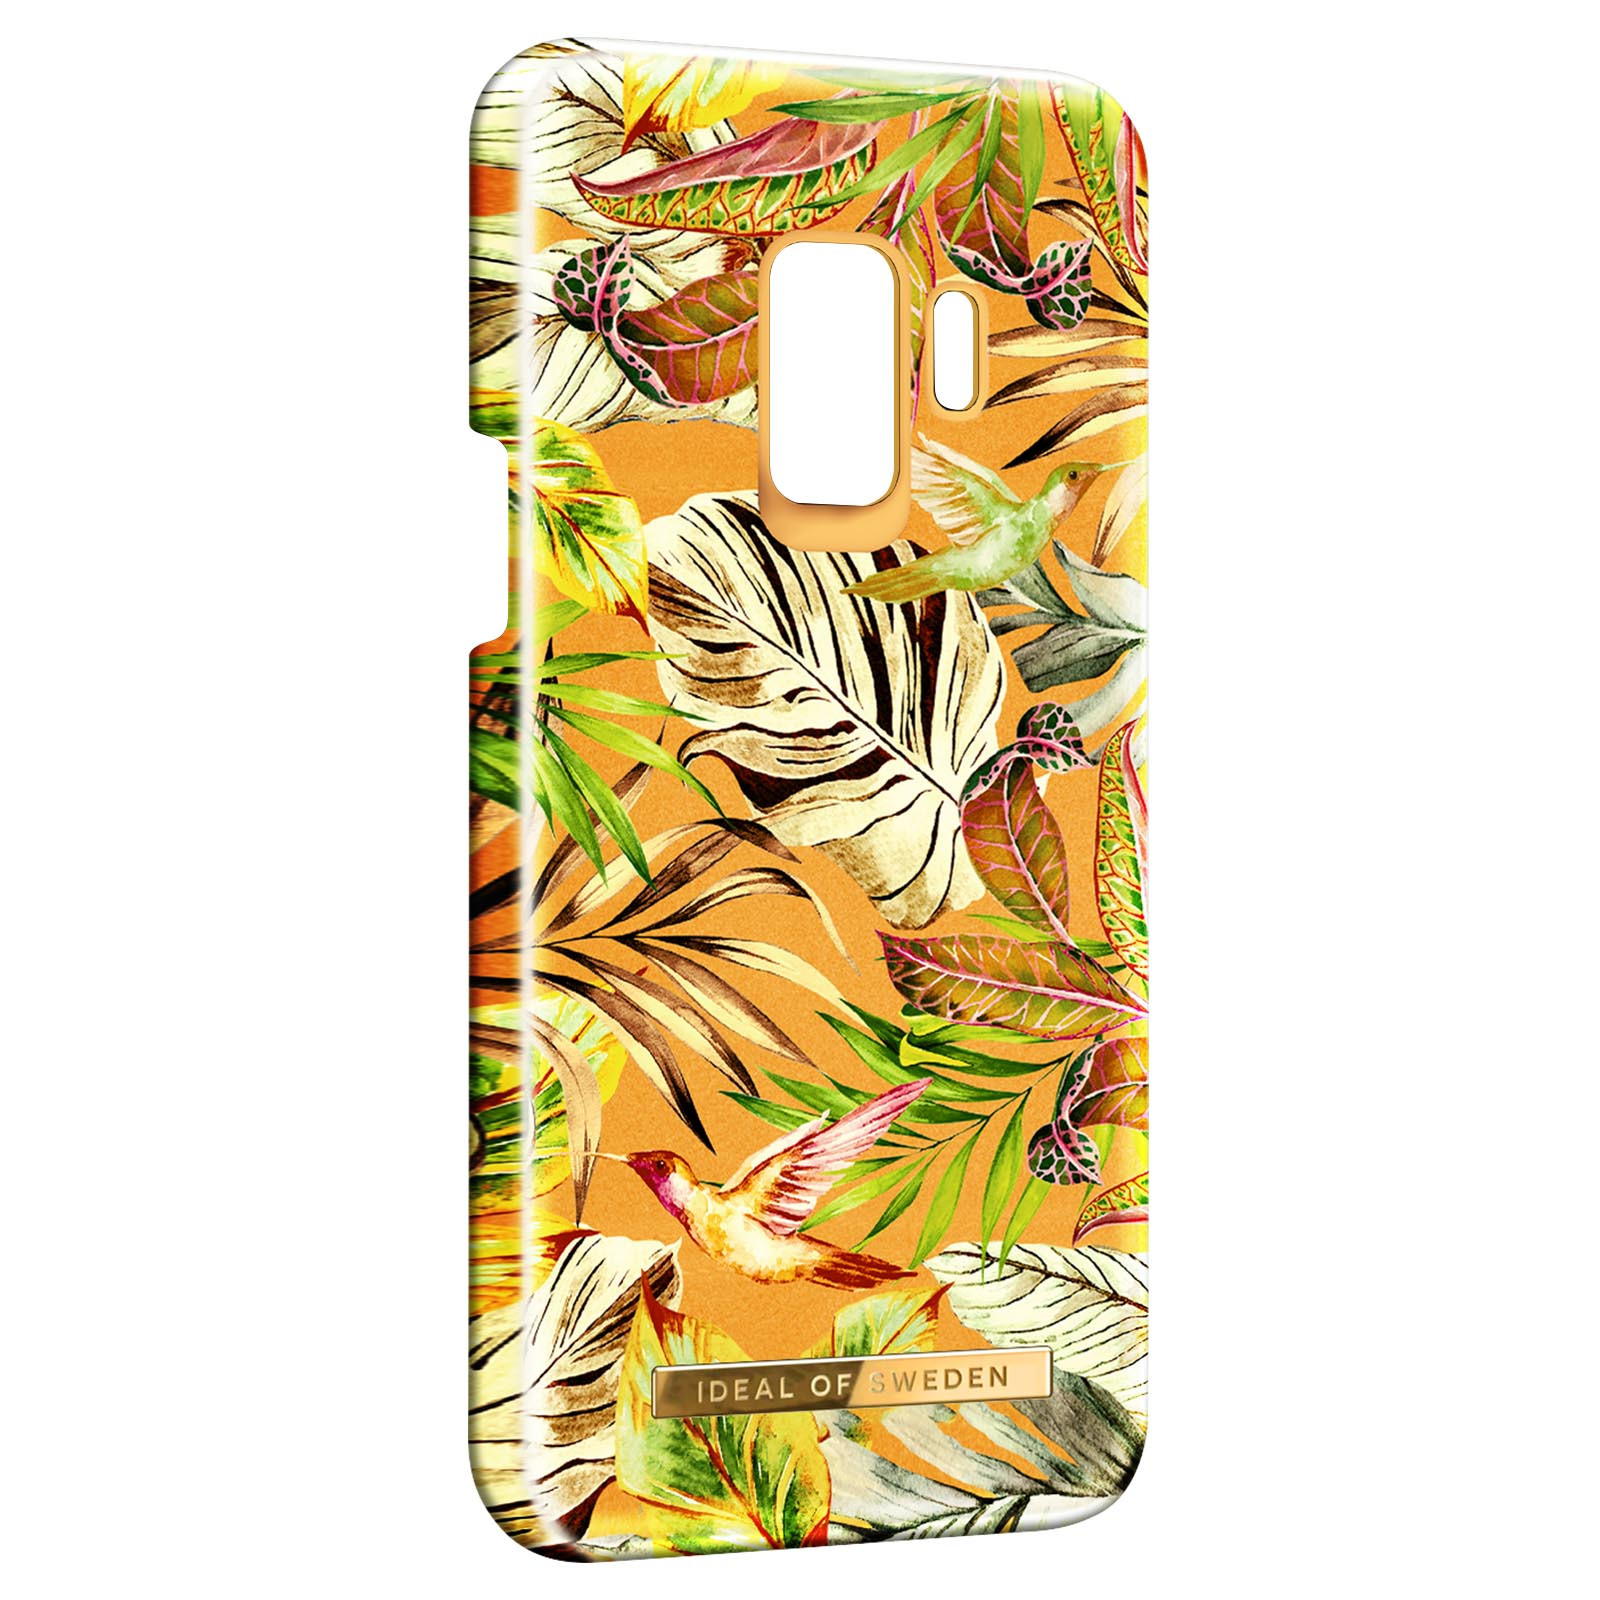 IDEAL OF SWEDEN Mango Orange Galaxy Backcover, Jungle S9, Samsung, Hülle Series